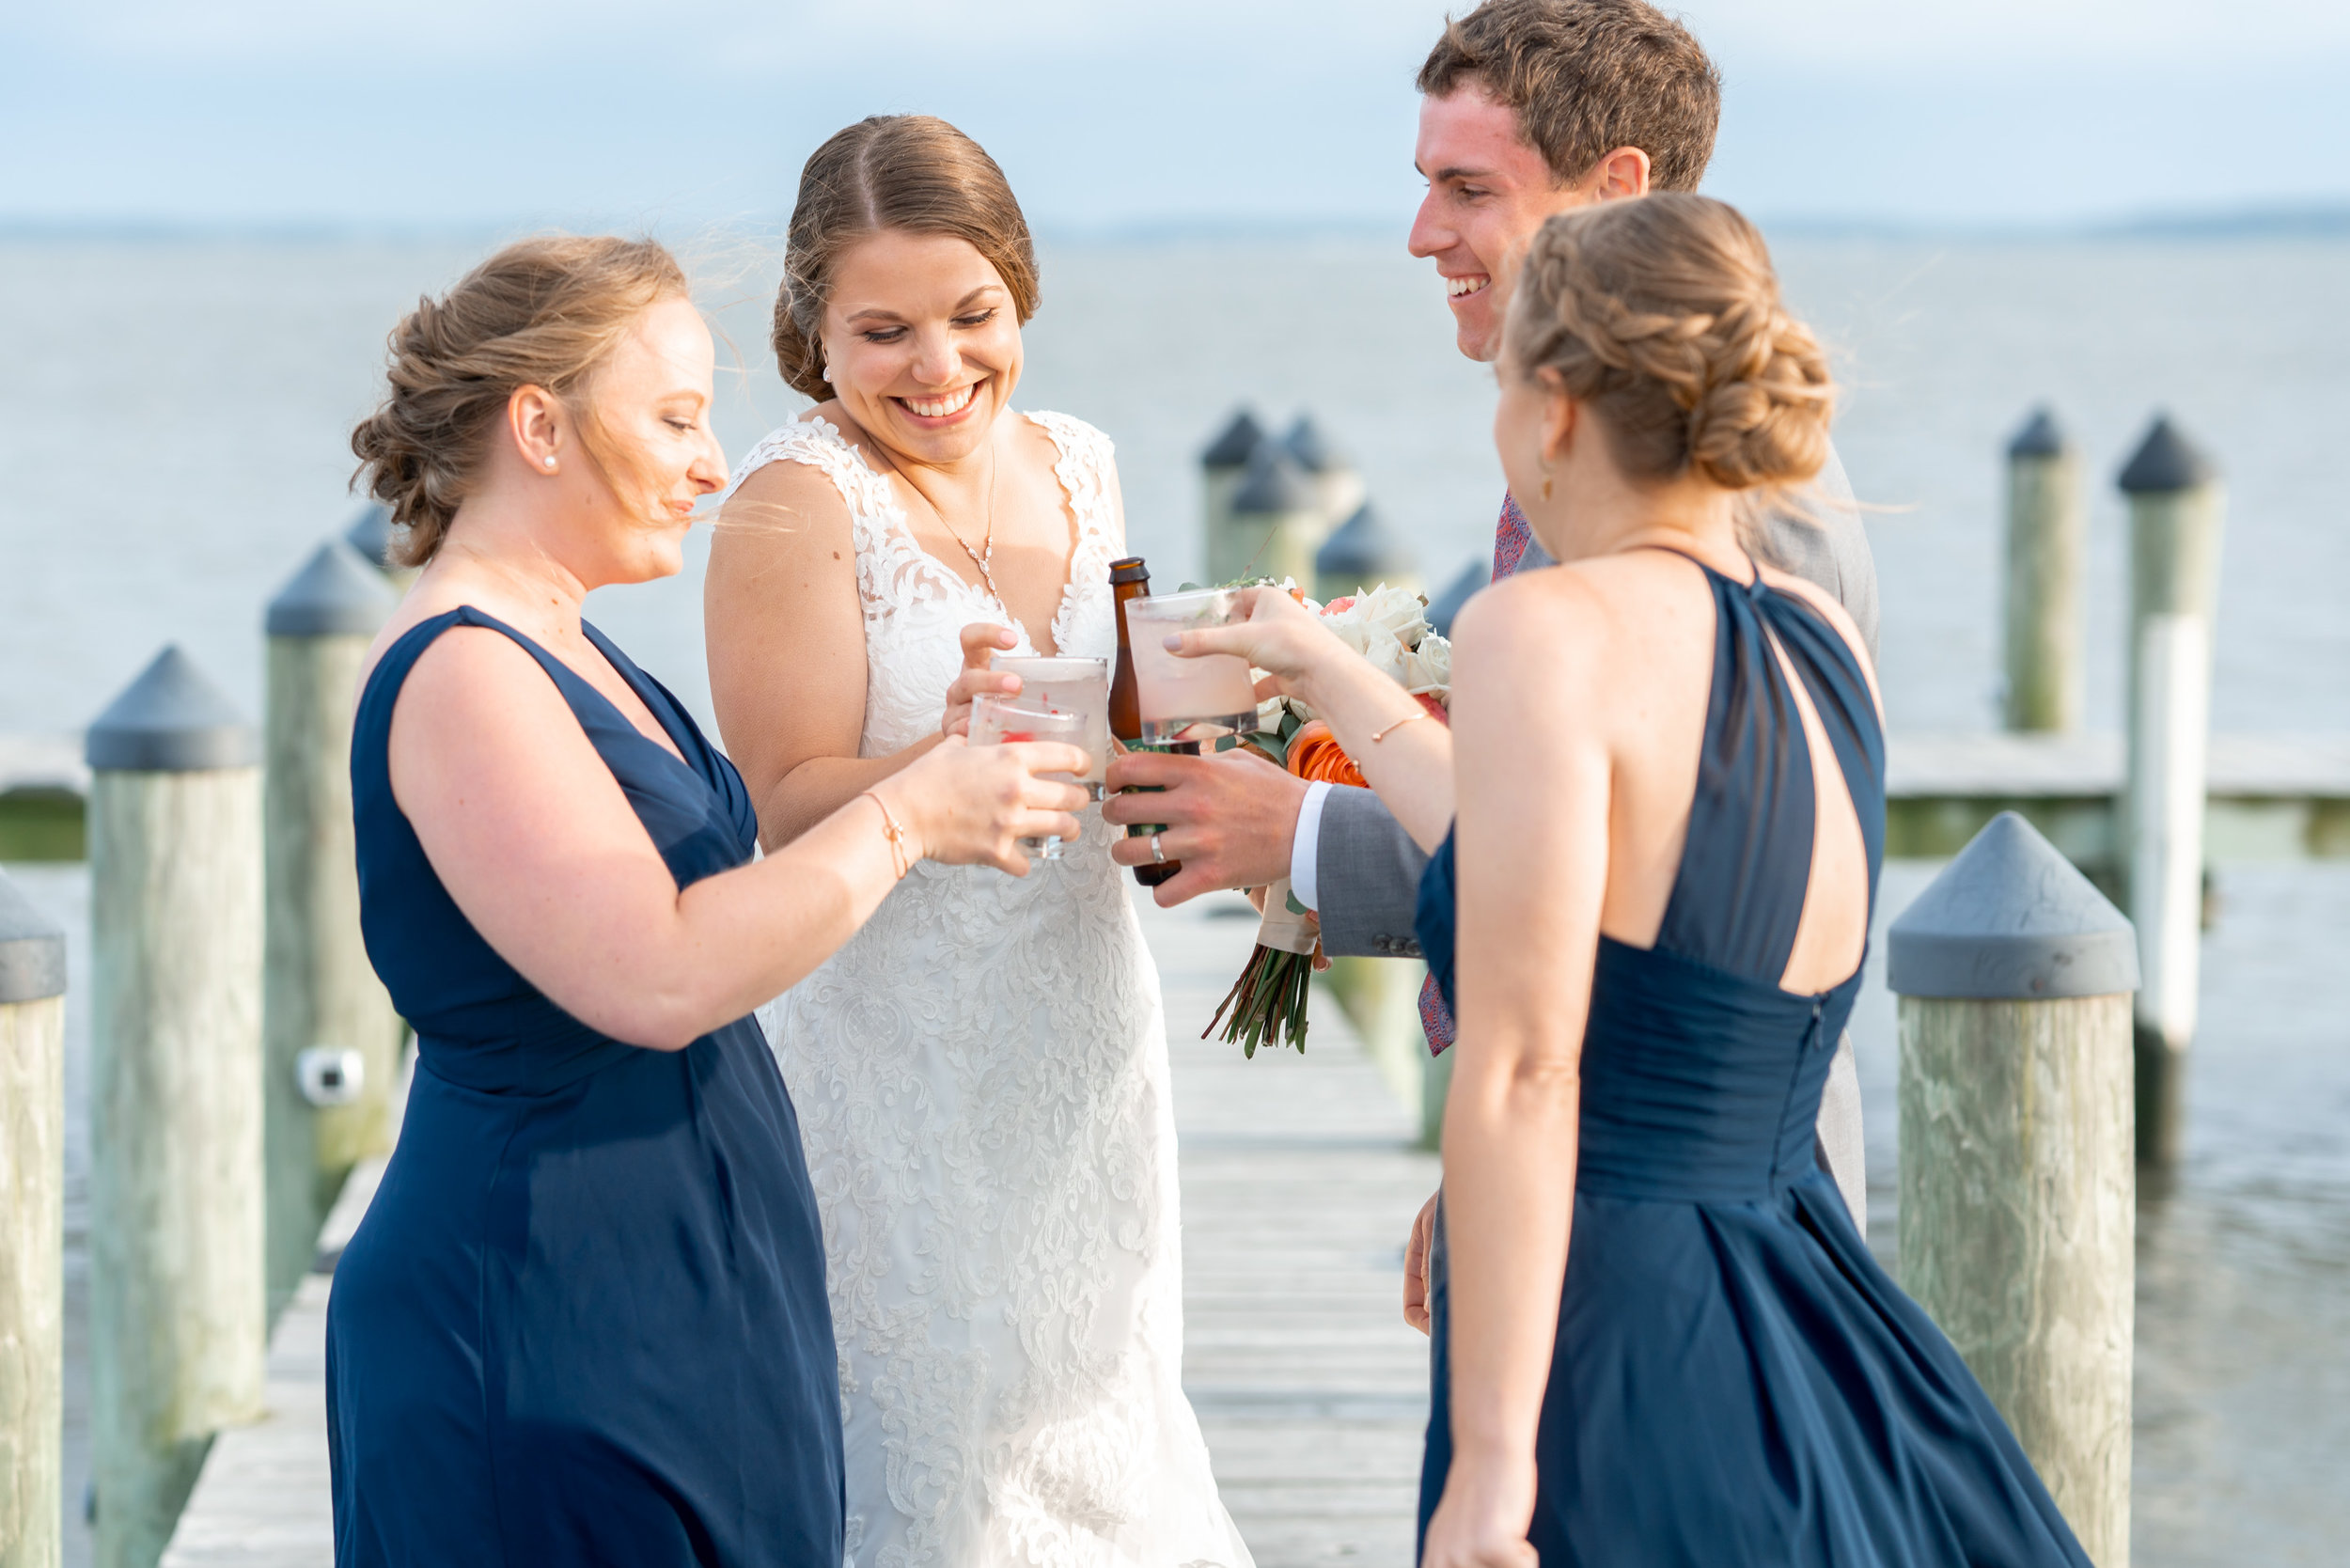 Bridesmaids bring out drinks to the bride and groom on the dock pier